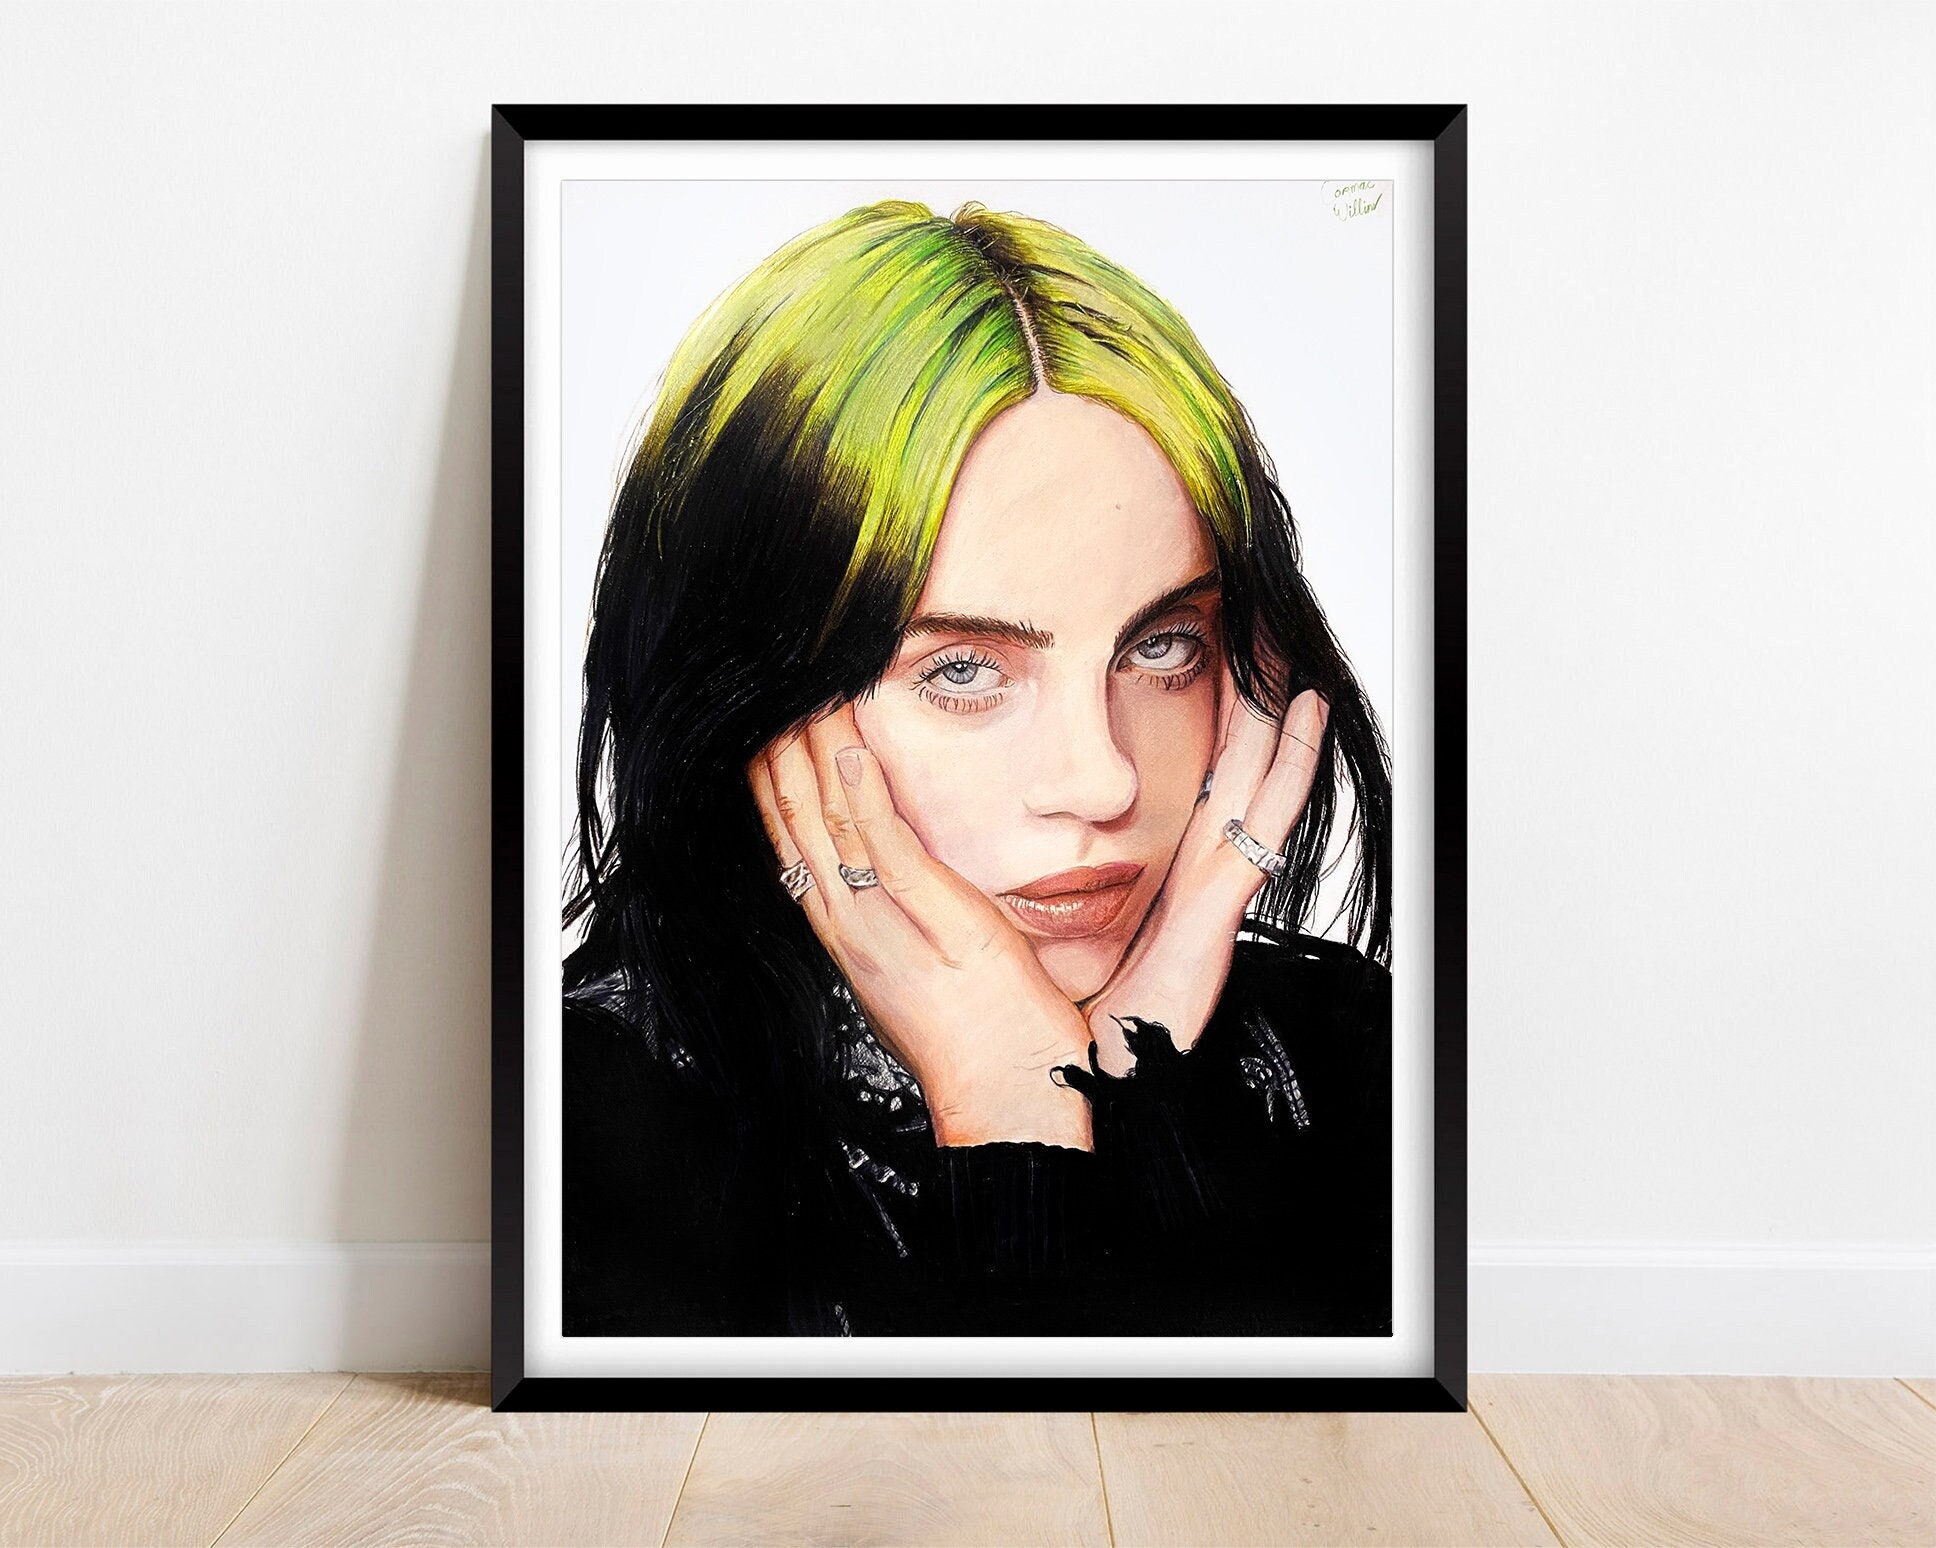 Aggregate more than 150 billie eilish drawings latest